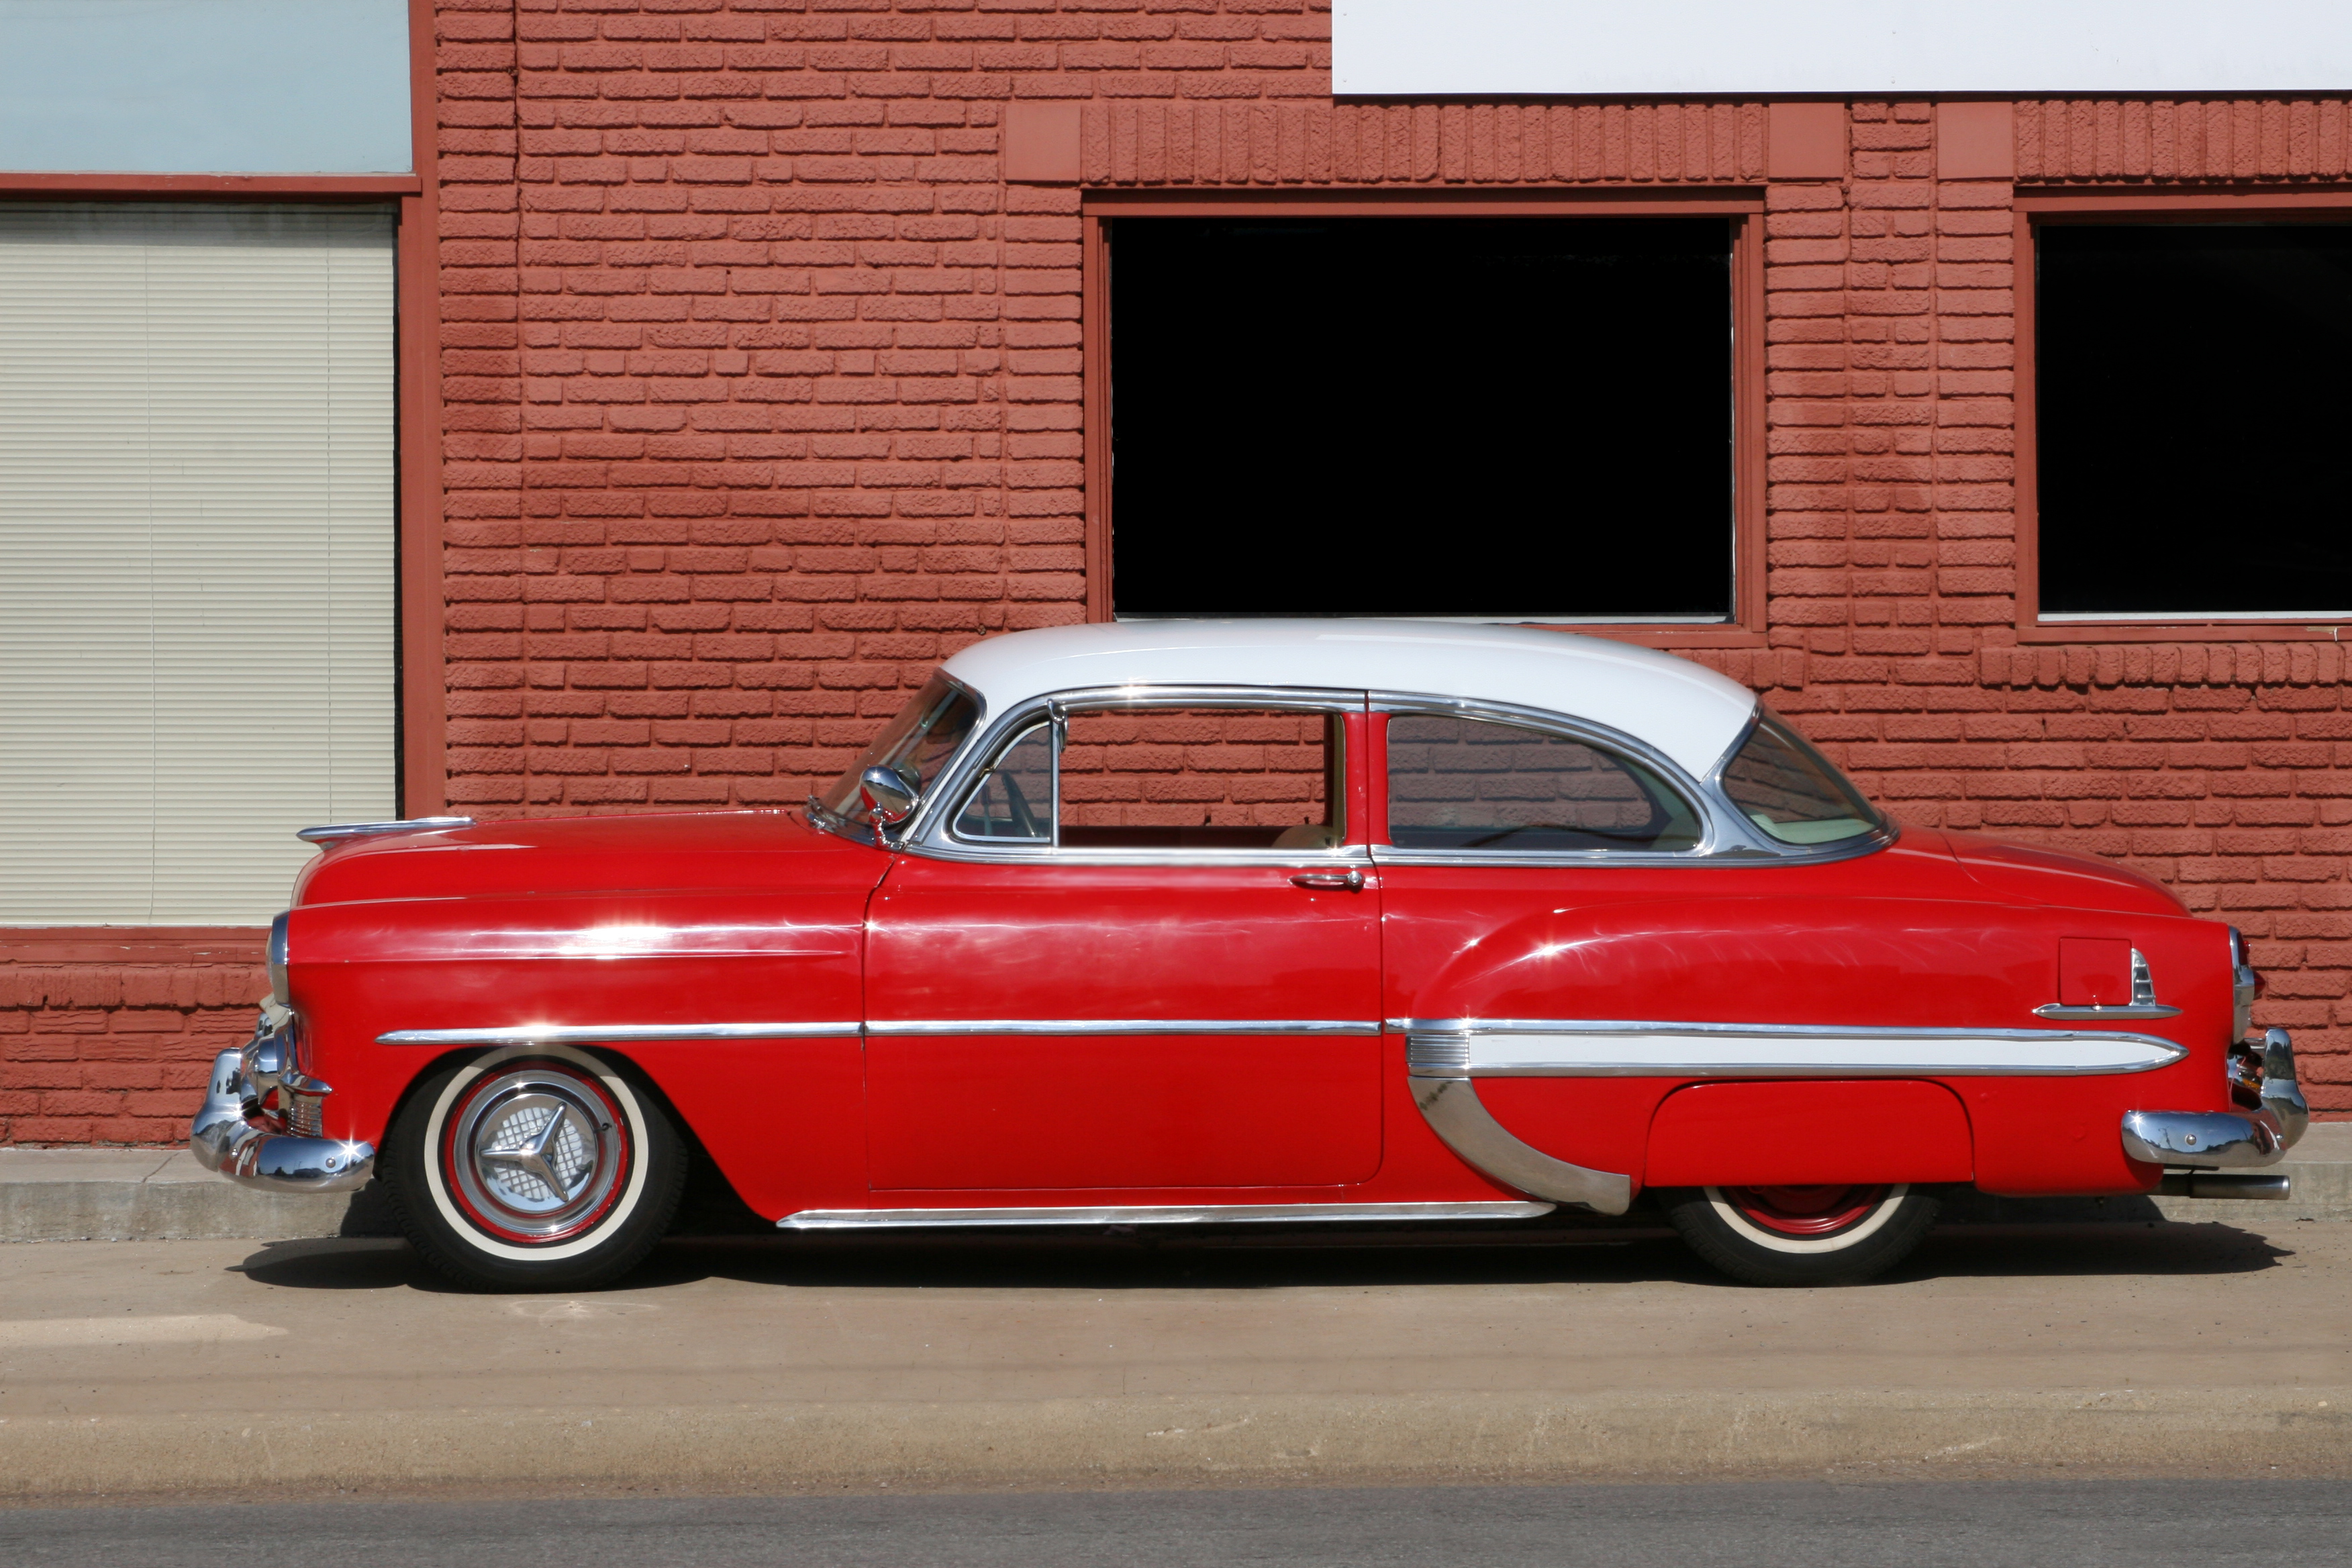 Ein roter Chevy Bel Air | Quelle: Getty Images